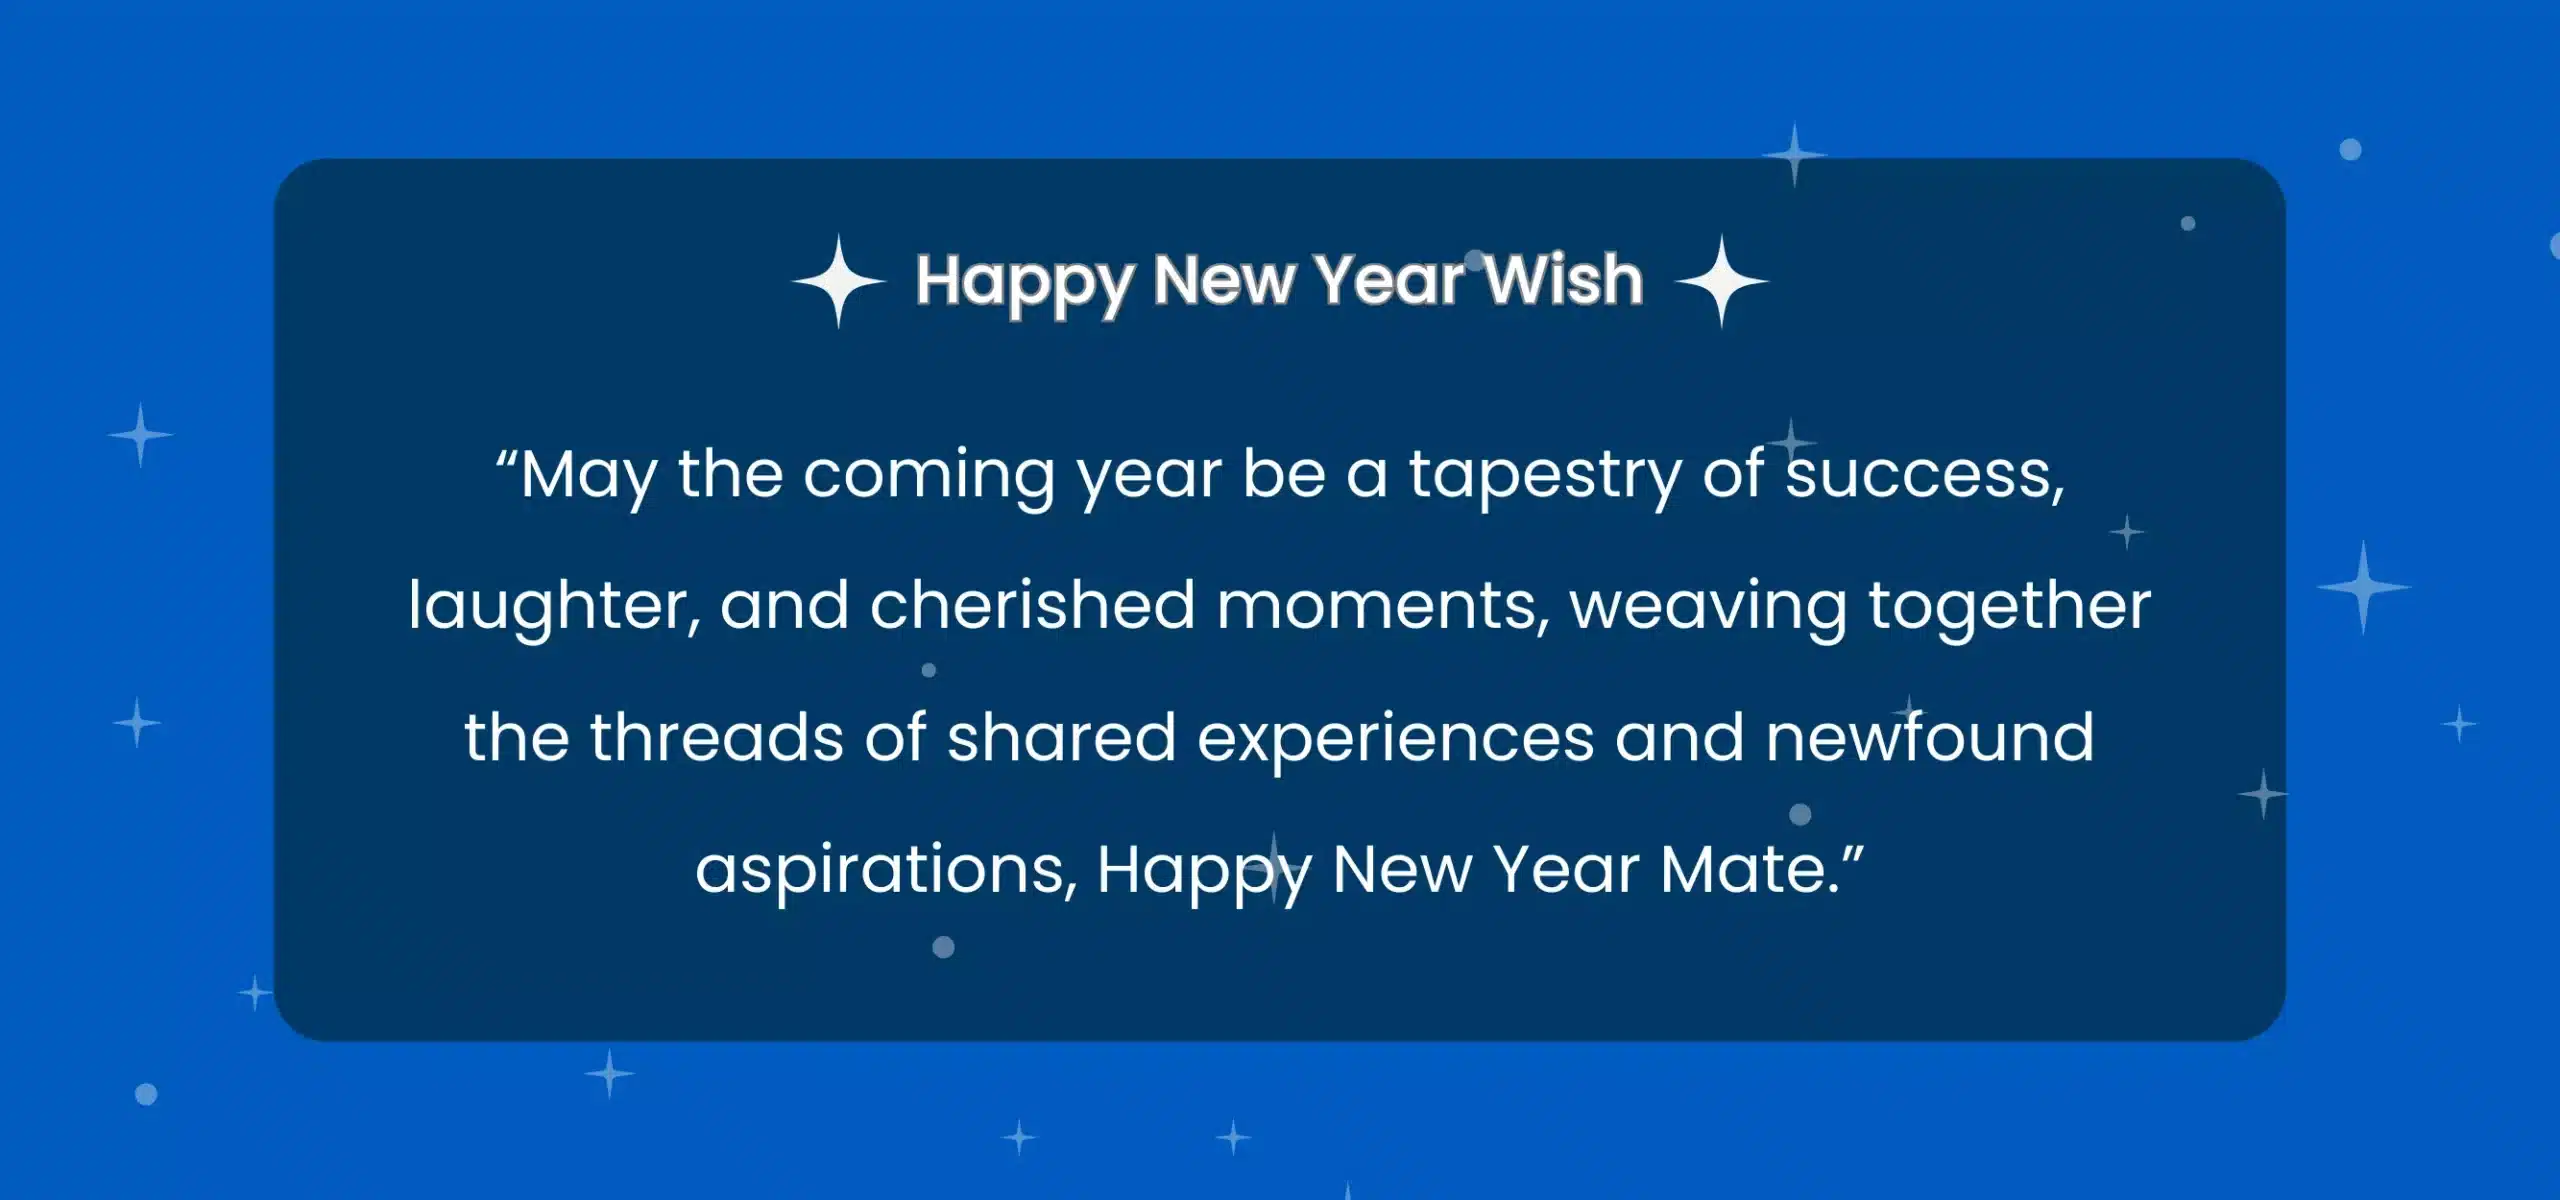 50 Professional New Year Wishes & Messages for Colleagues